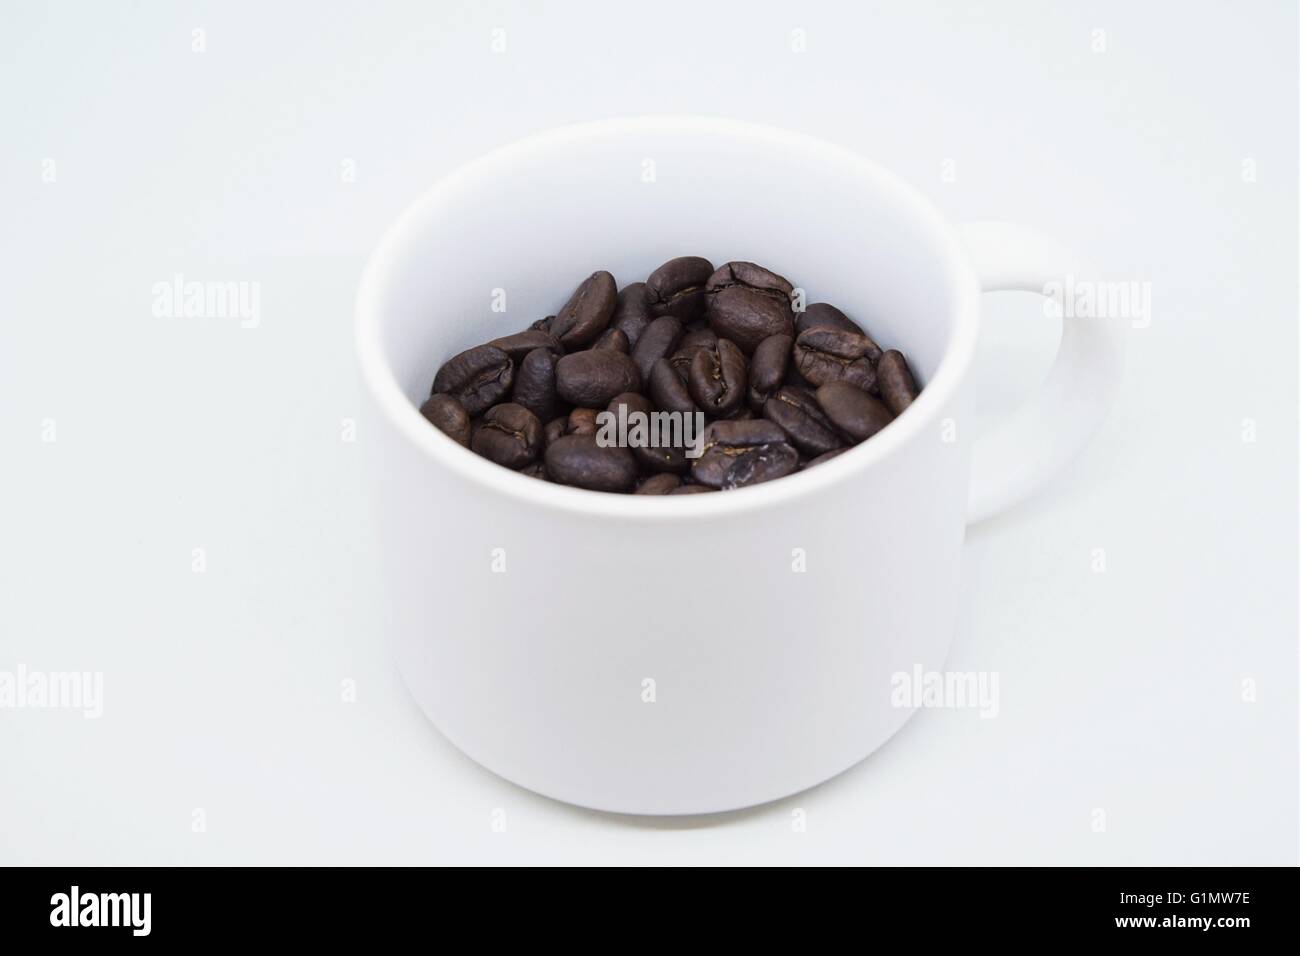 A cup of coffee beans. Stock Photo